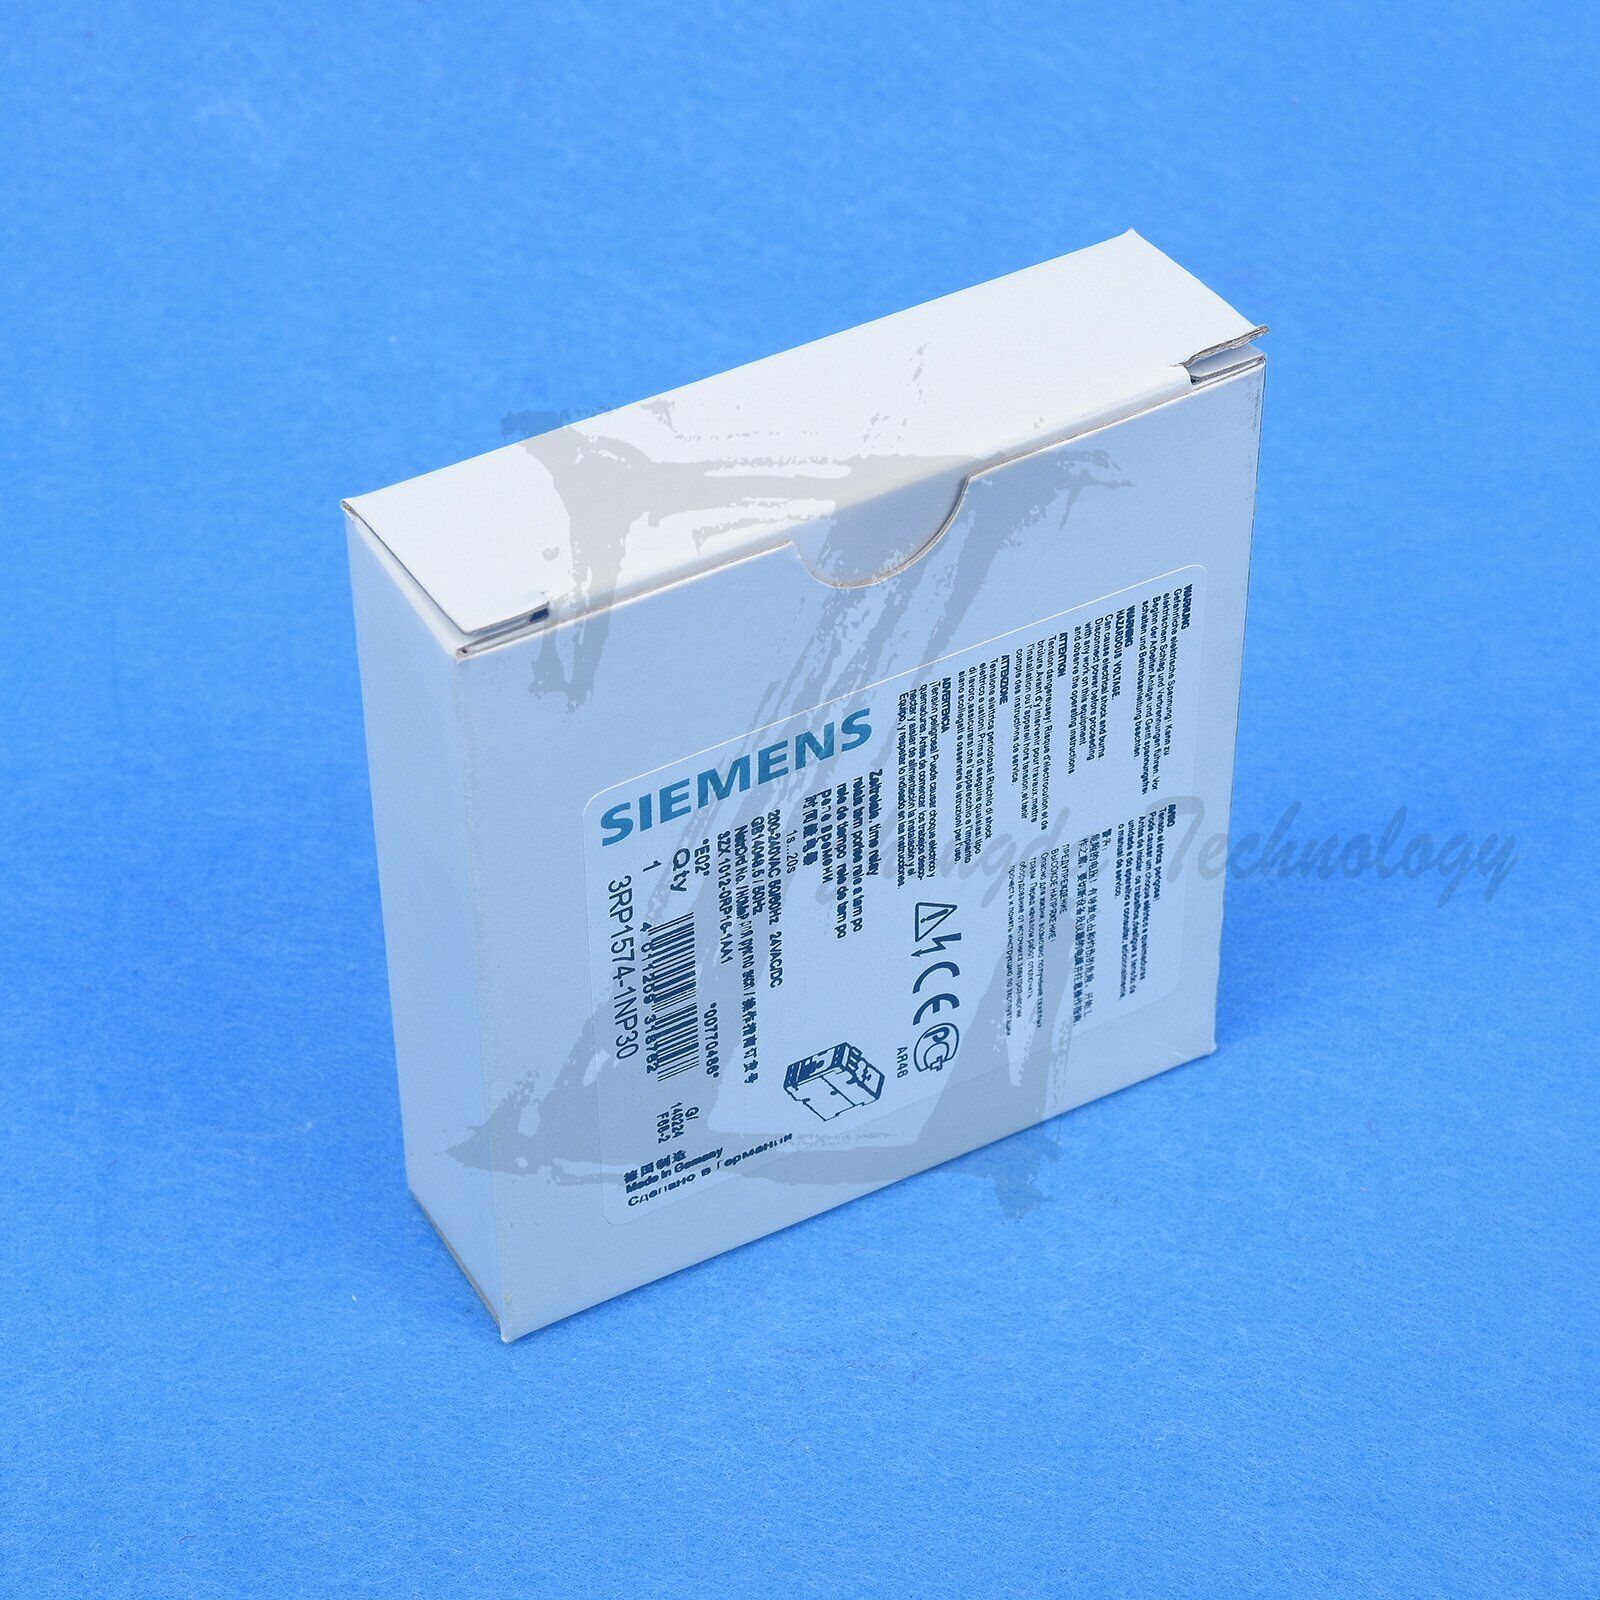 1PC New in box Siemens Relay 3RP1574-1NP30 One year warranty 3RP15741NP30 KOEED 101-200, 90%, import_2020_10_10_031751, Other, Siemens